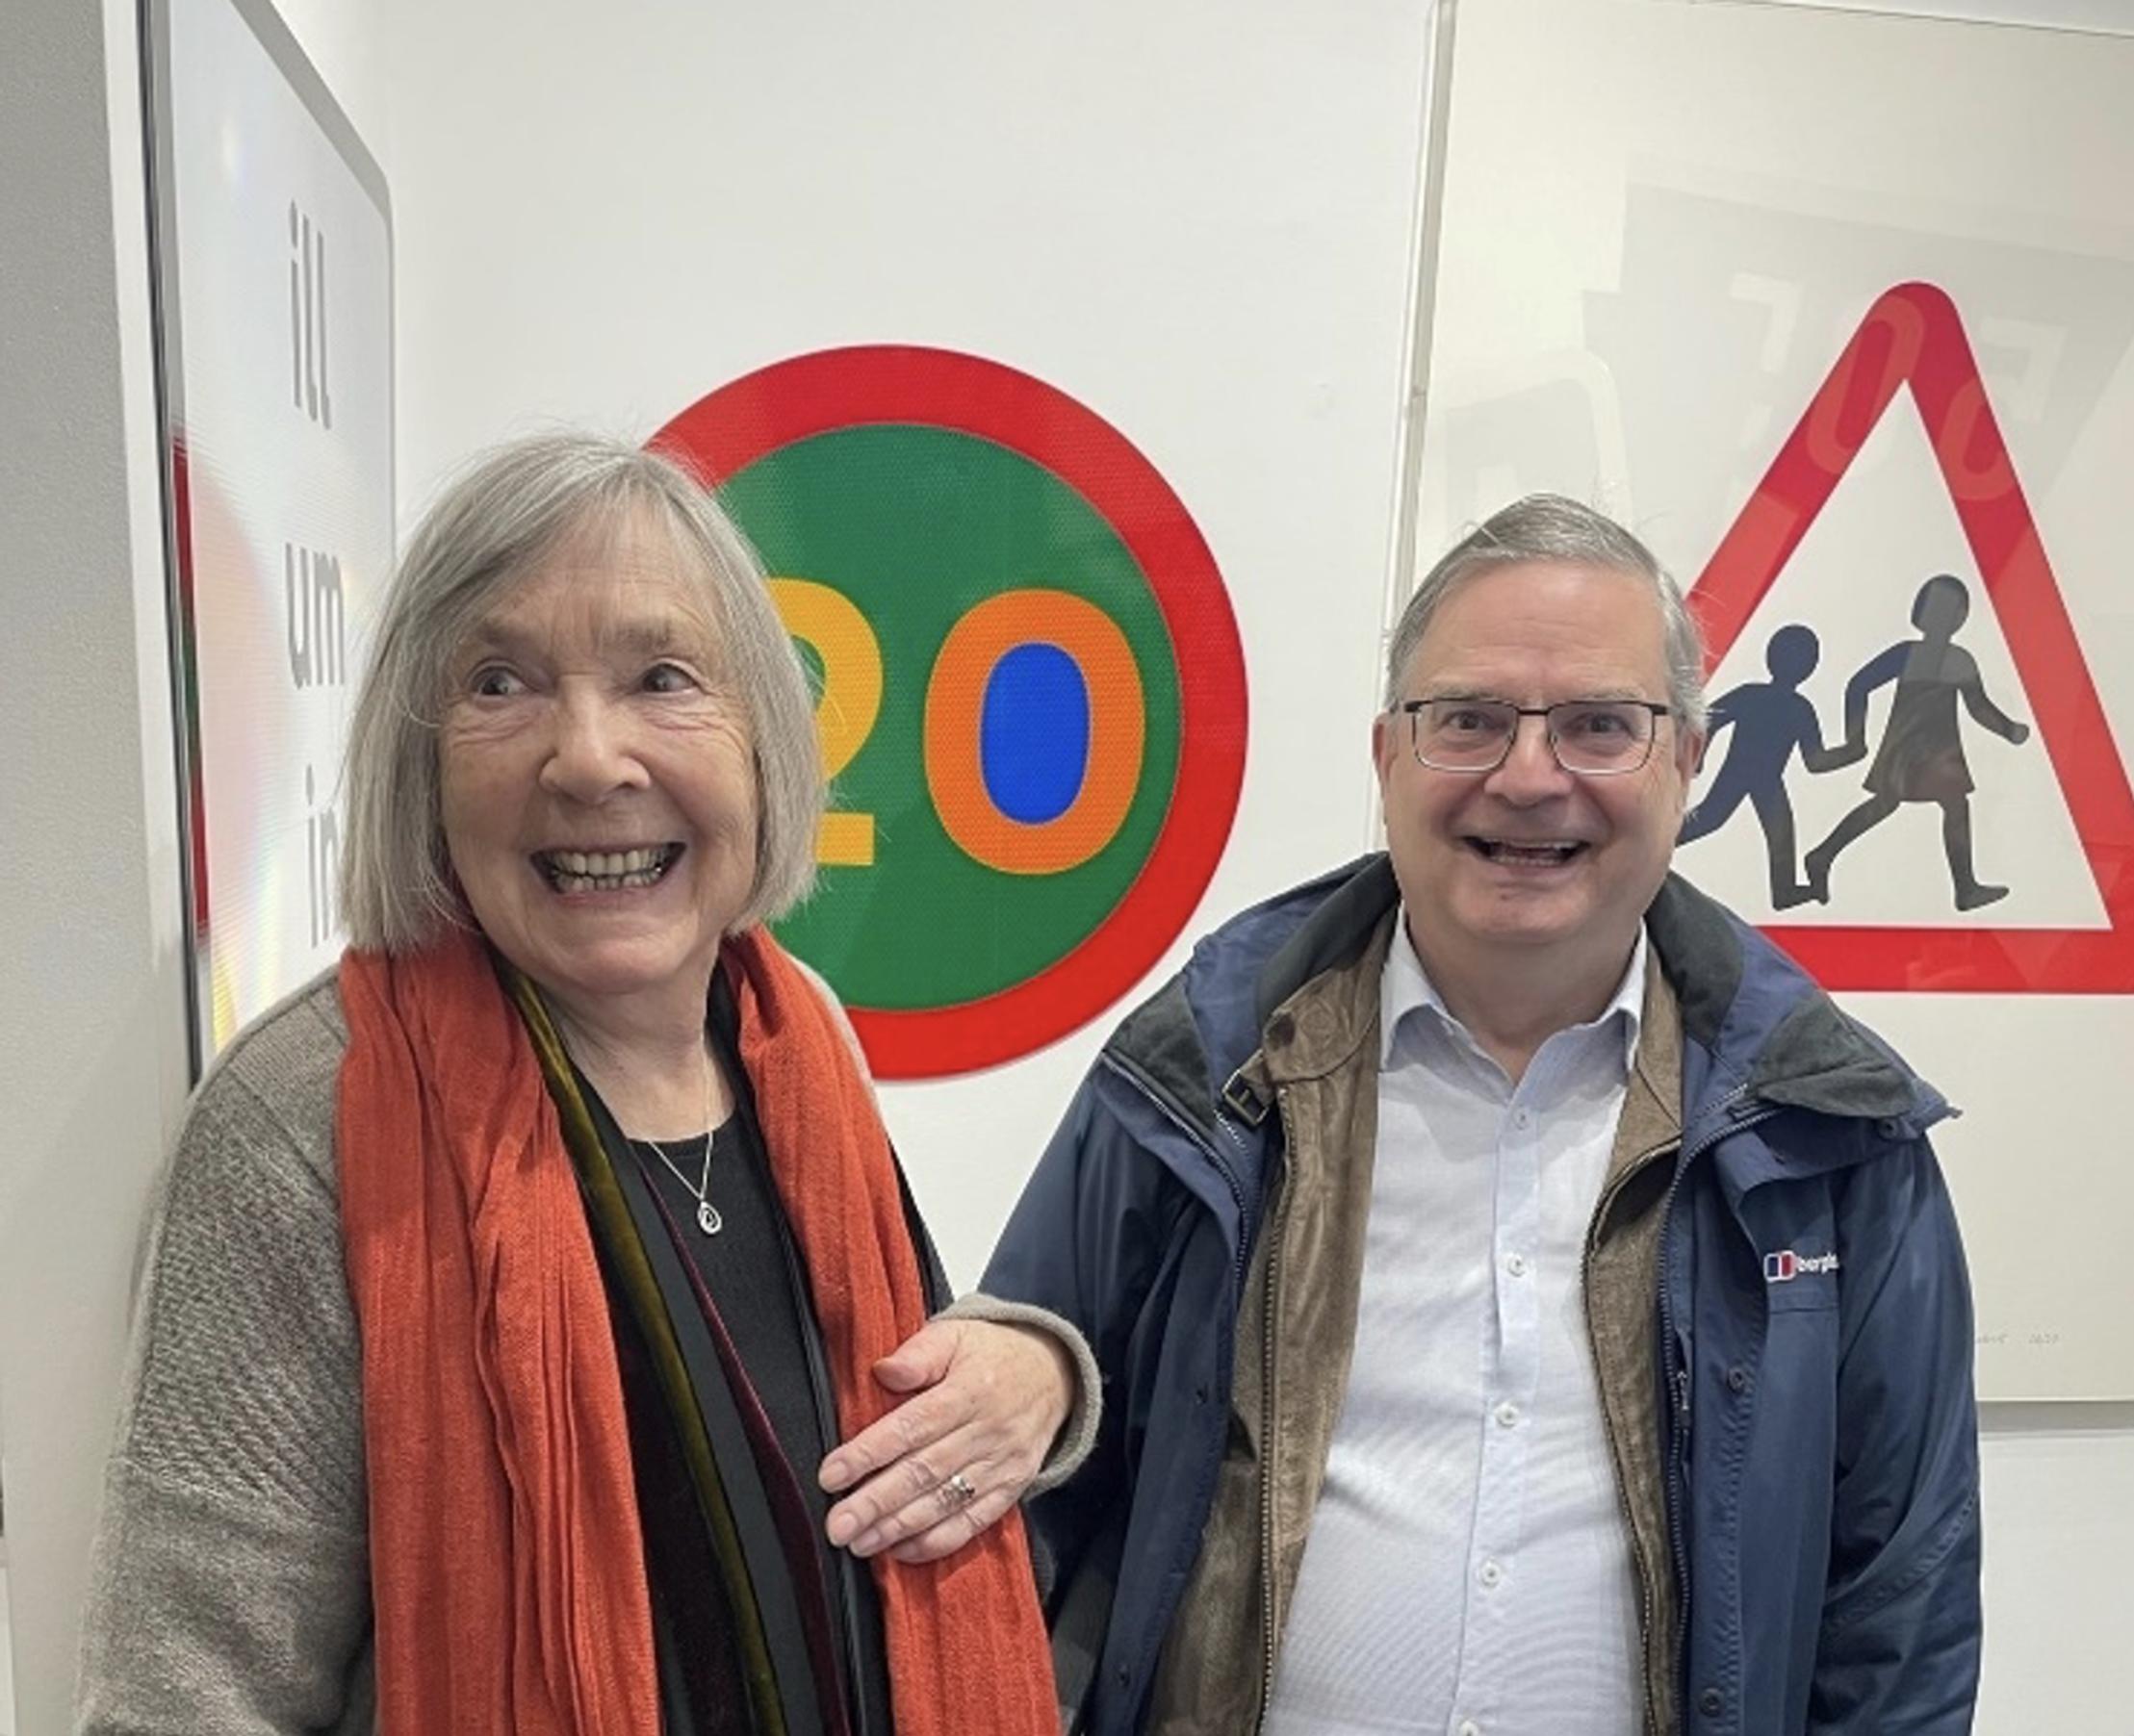 Margaret Calvert OBE and Simon Morgan with her new works